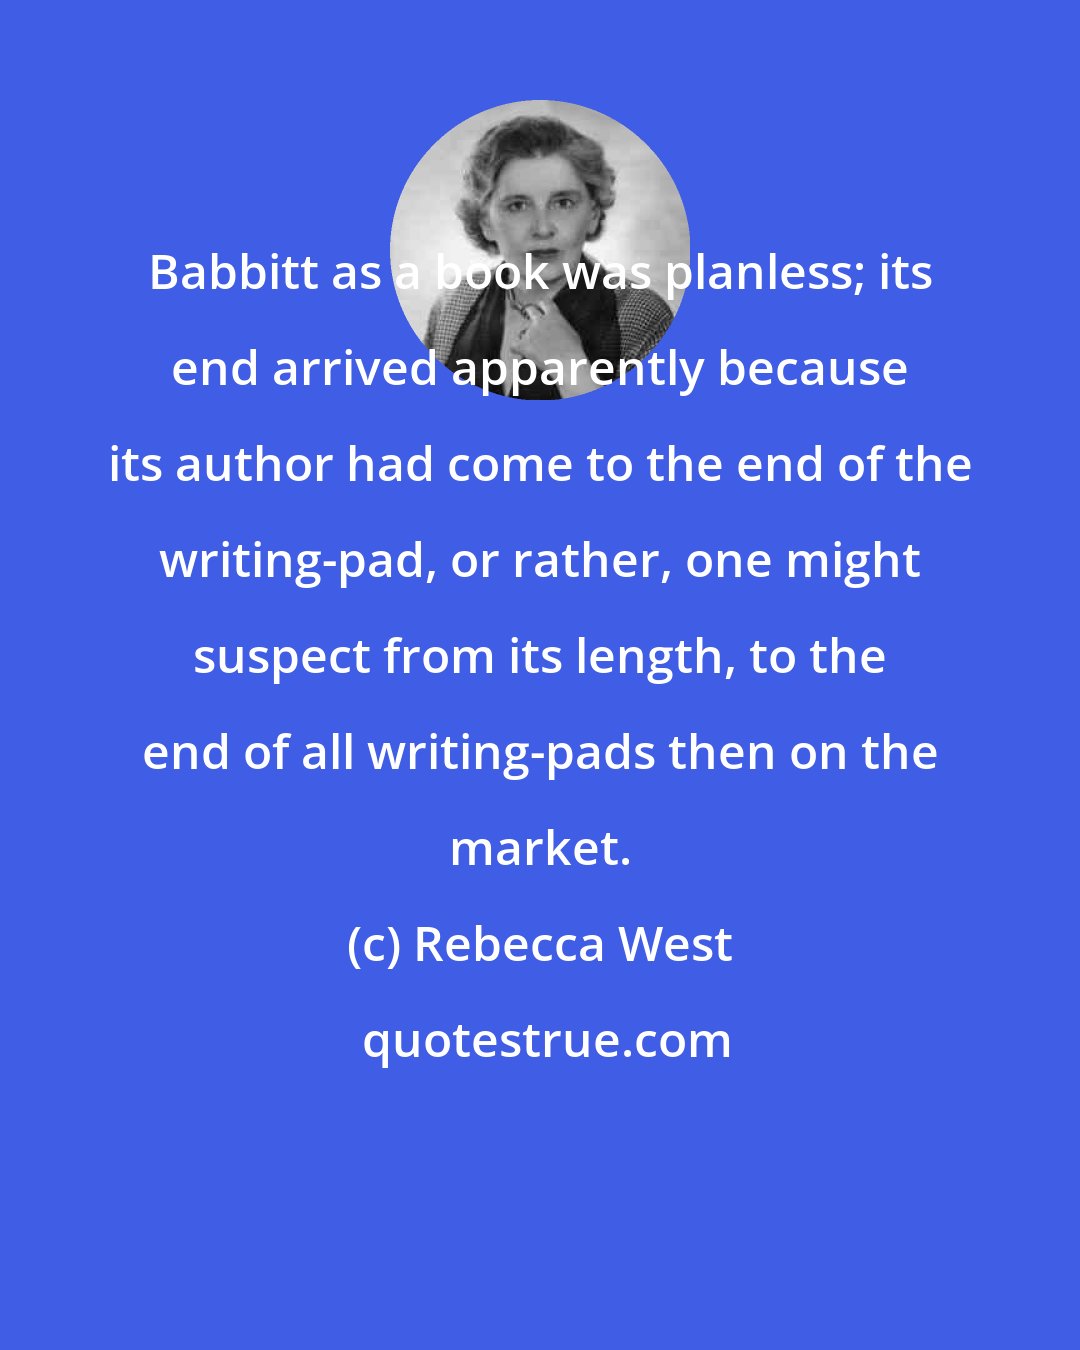 Rebecca West: Babbitt as a book was planless; its end arrived apparently because its author had come to the end of the writing-pad, or rather, one might suspect from its length, to the end of all writing-pads then on the market.